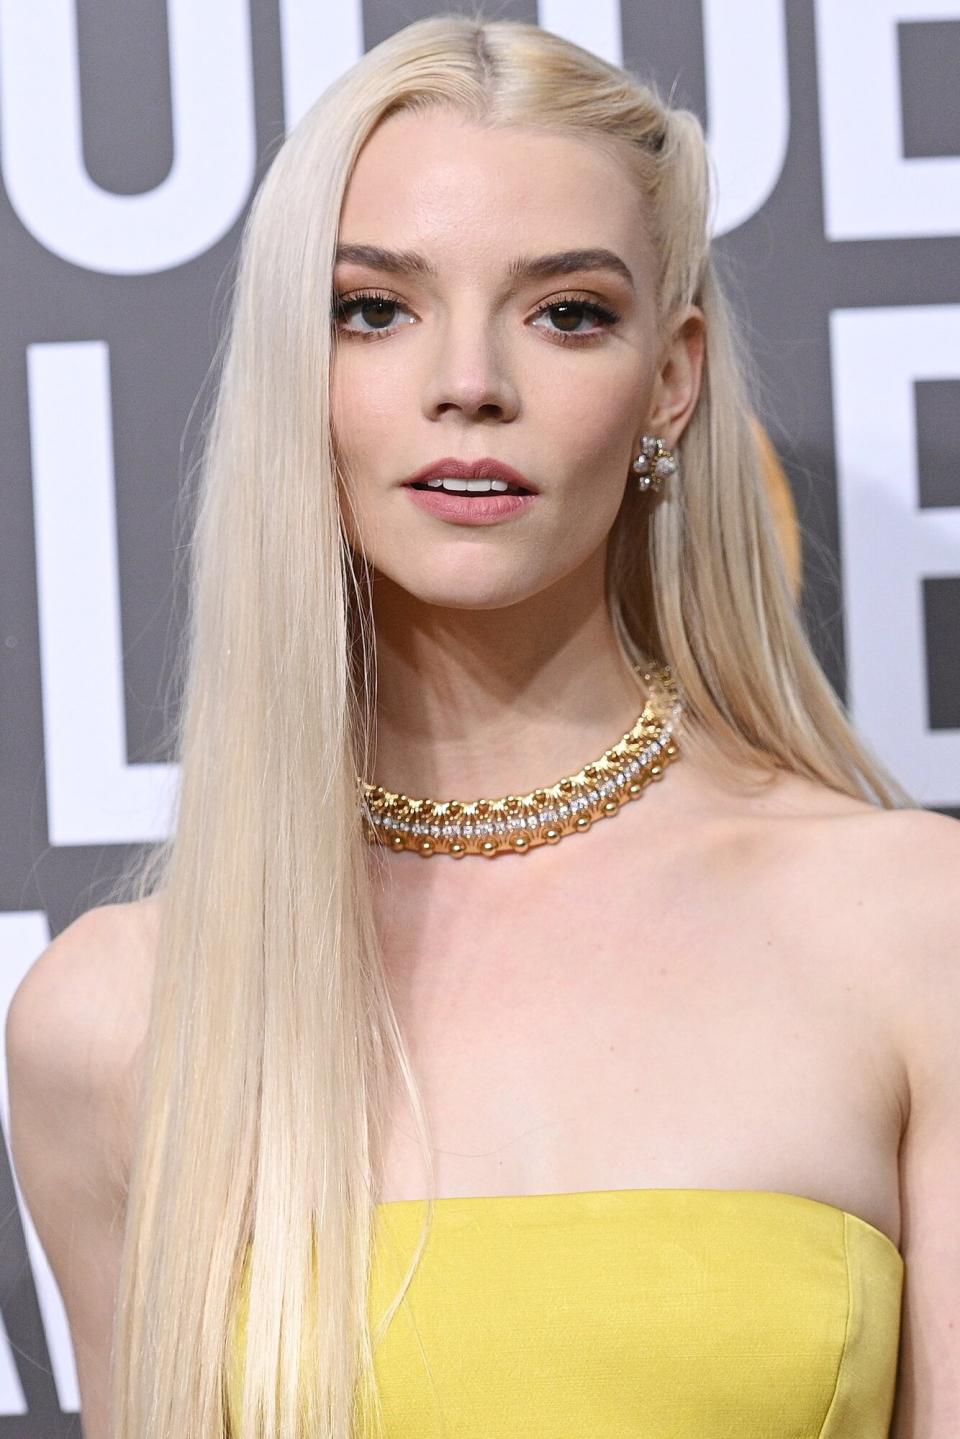 Anya Taylor-Joy at the 80th Annual Golden Globe Awards held at The Beverly Hilton on January 10, 2023 in Beverly Hills, California.